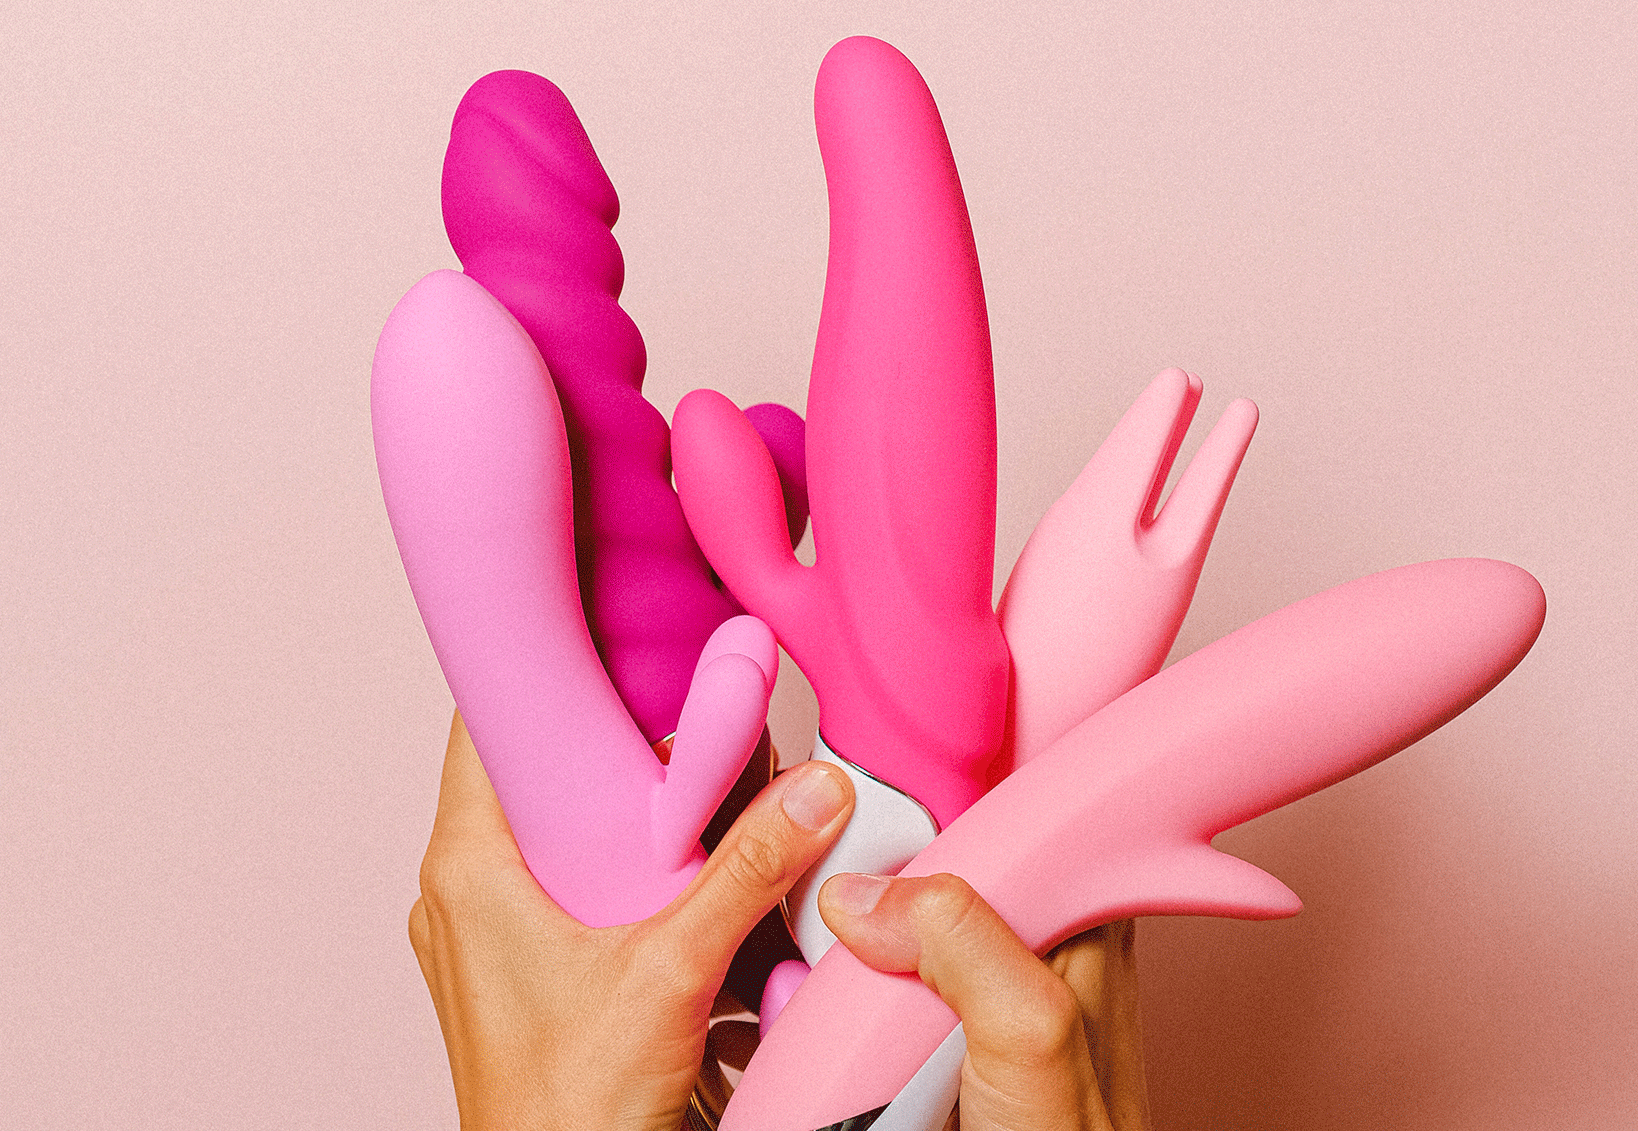 How To Choose A Vibrator For The Best Pleasure